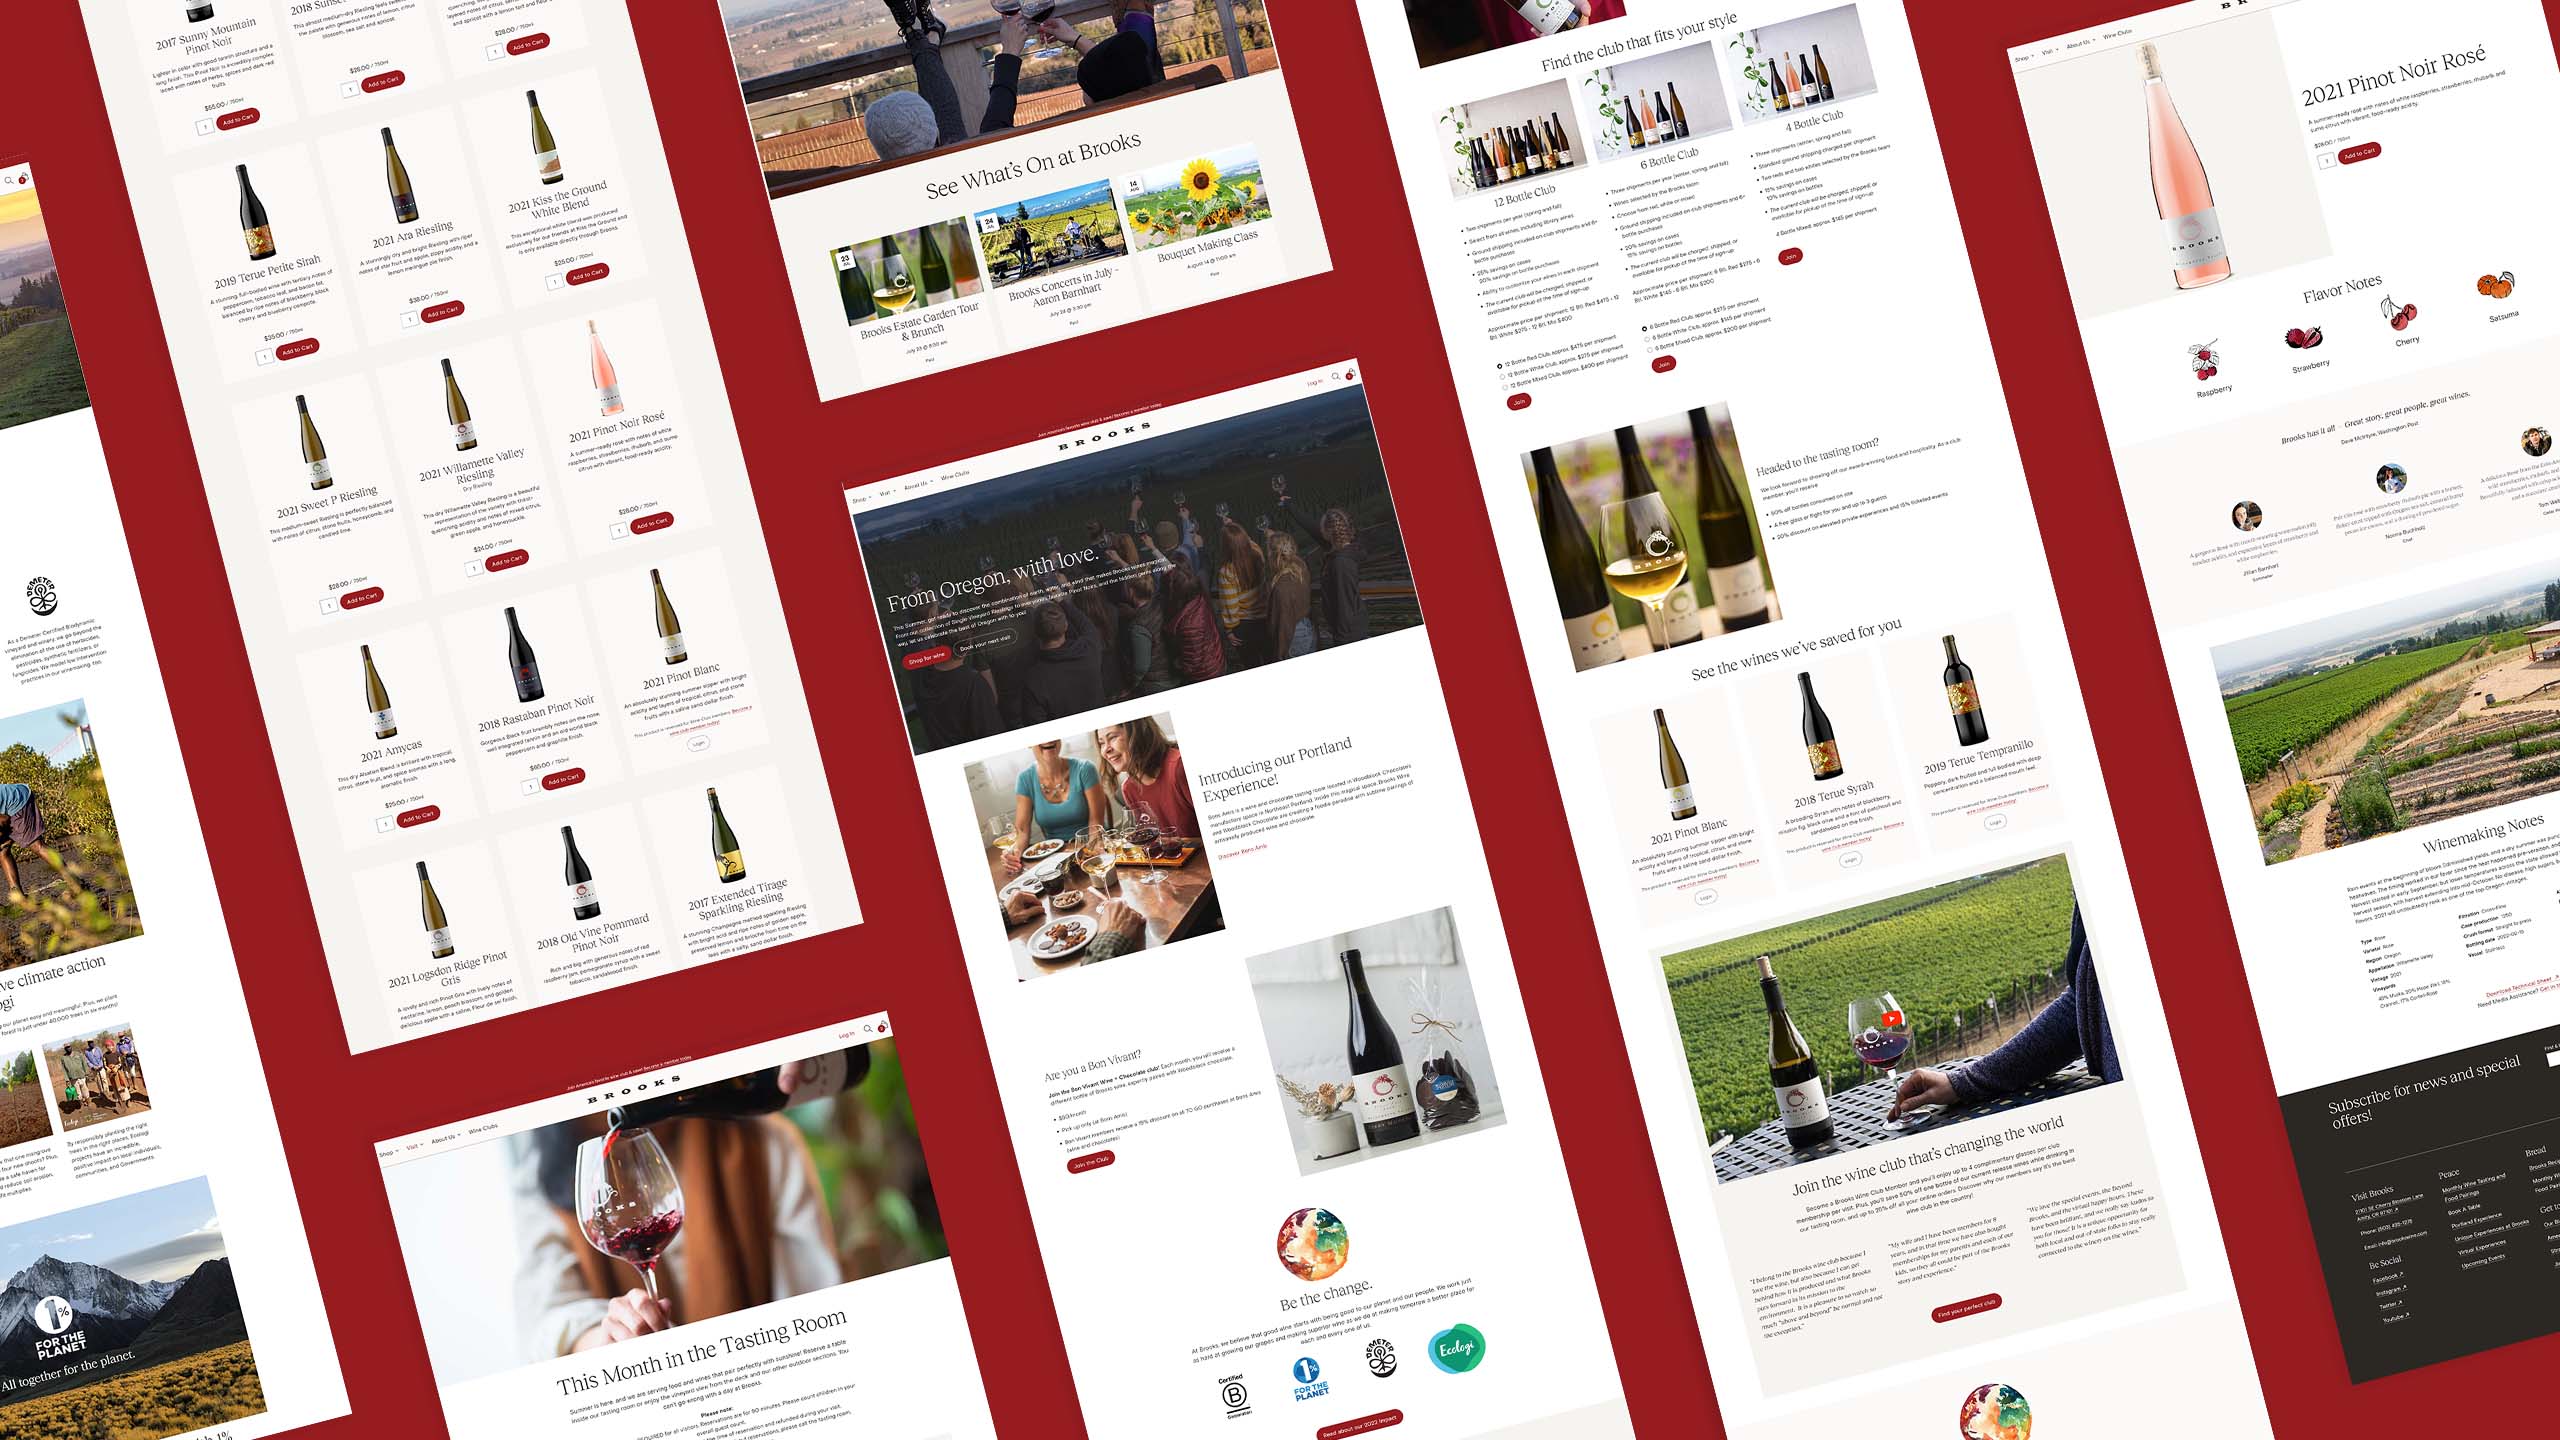 View our Brooks Wine website project